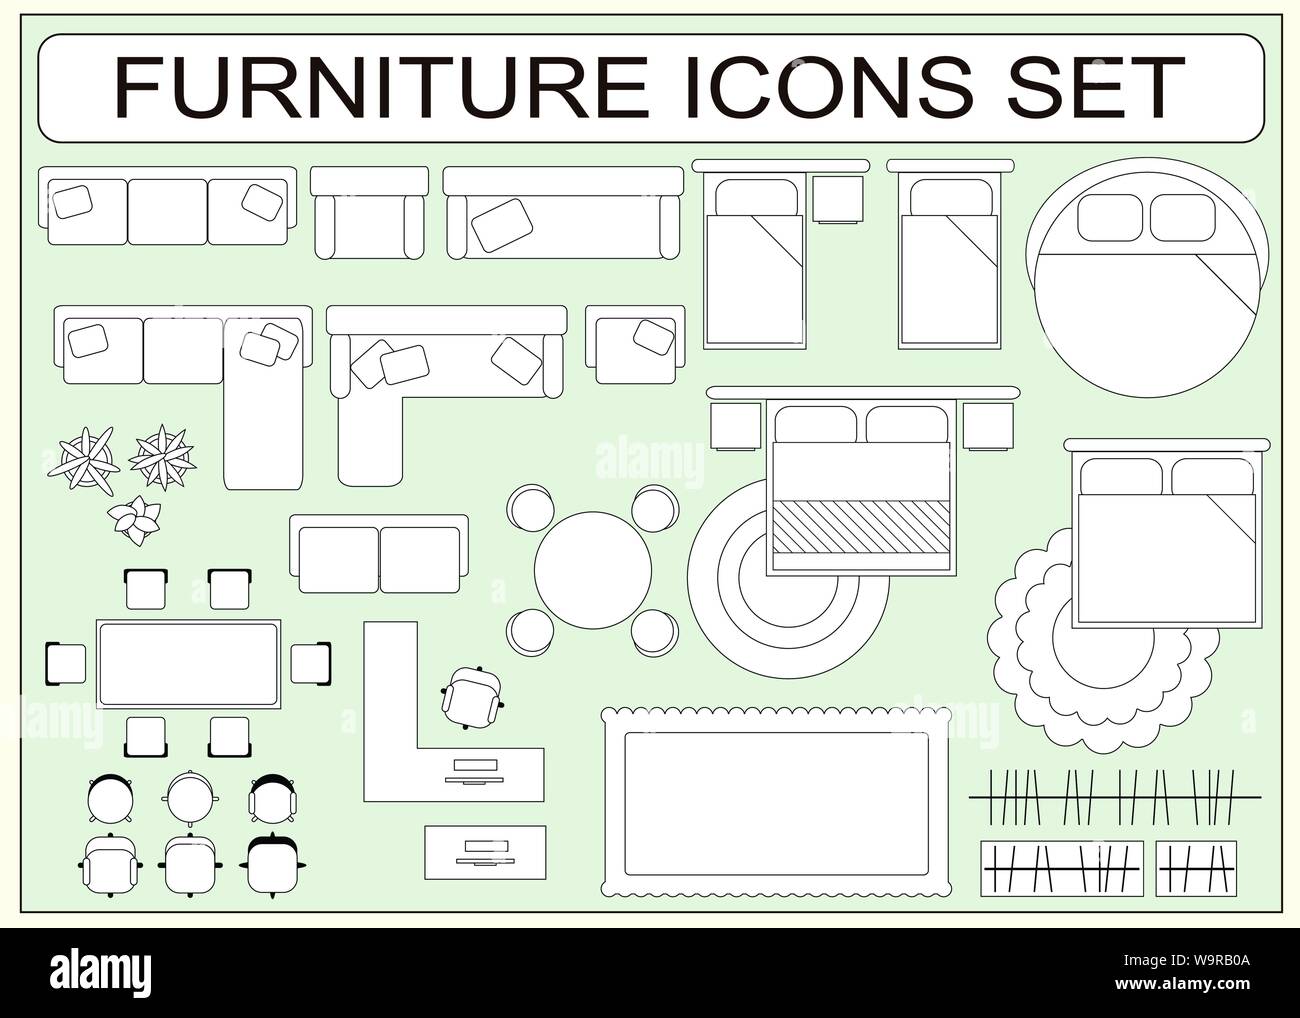 Set Of Simple Furniture Vector Icons As Design Elements Sofa